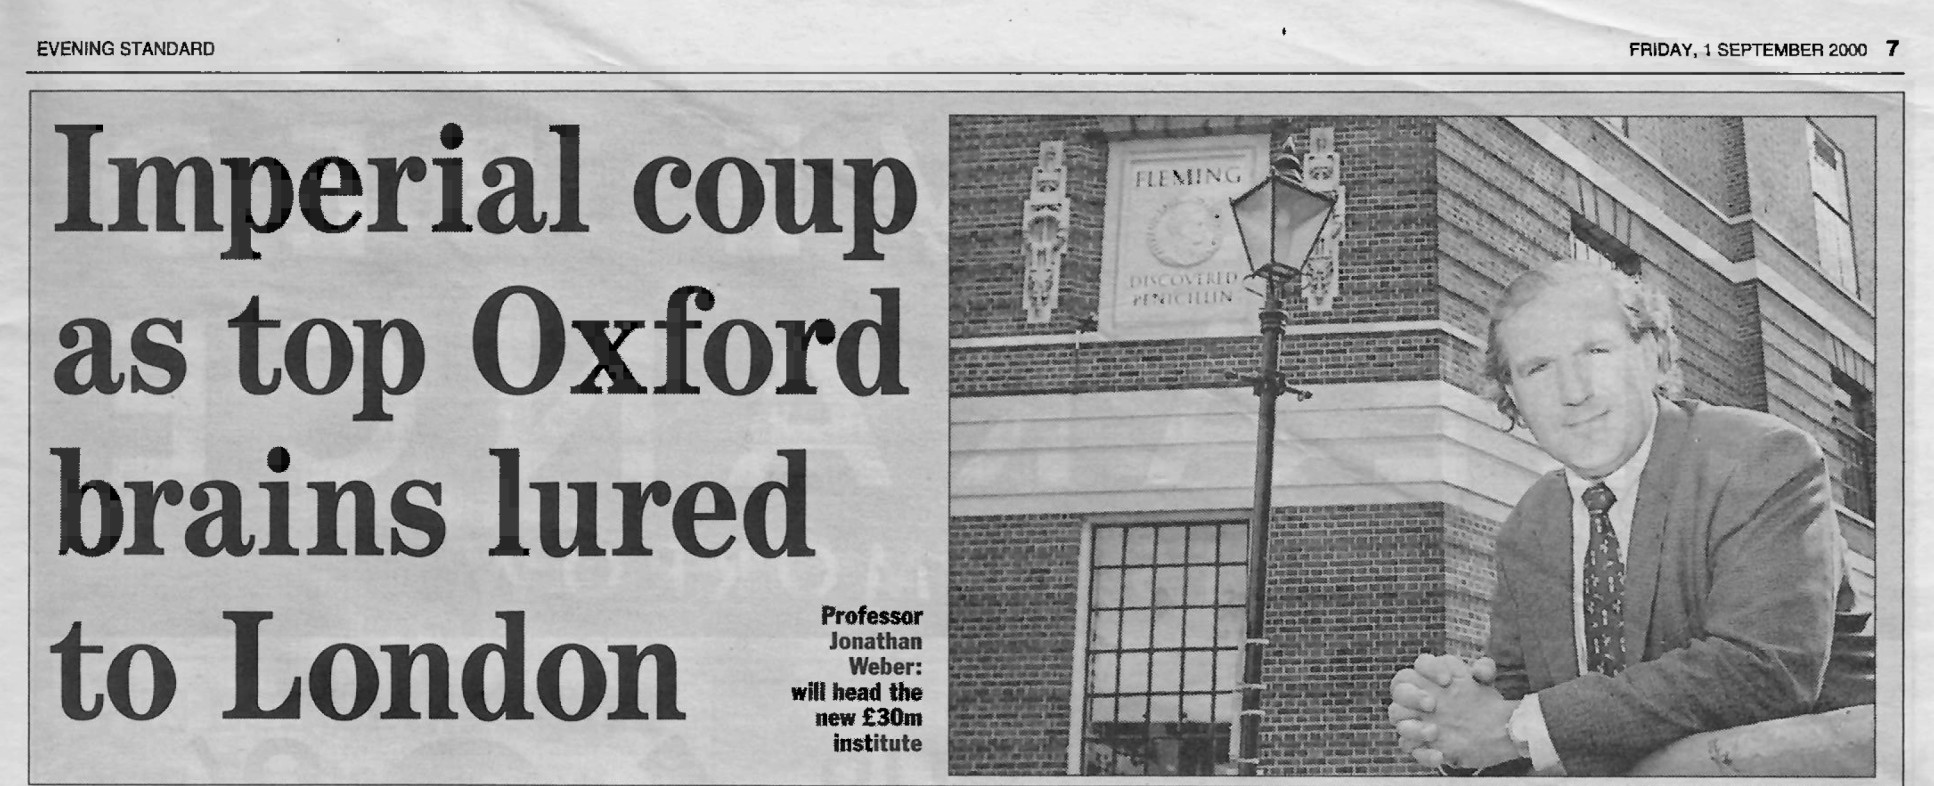 "Imperial coup as top Oxford brains lured to London"—Evening Standard, 1 September 2000